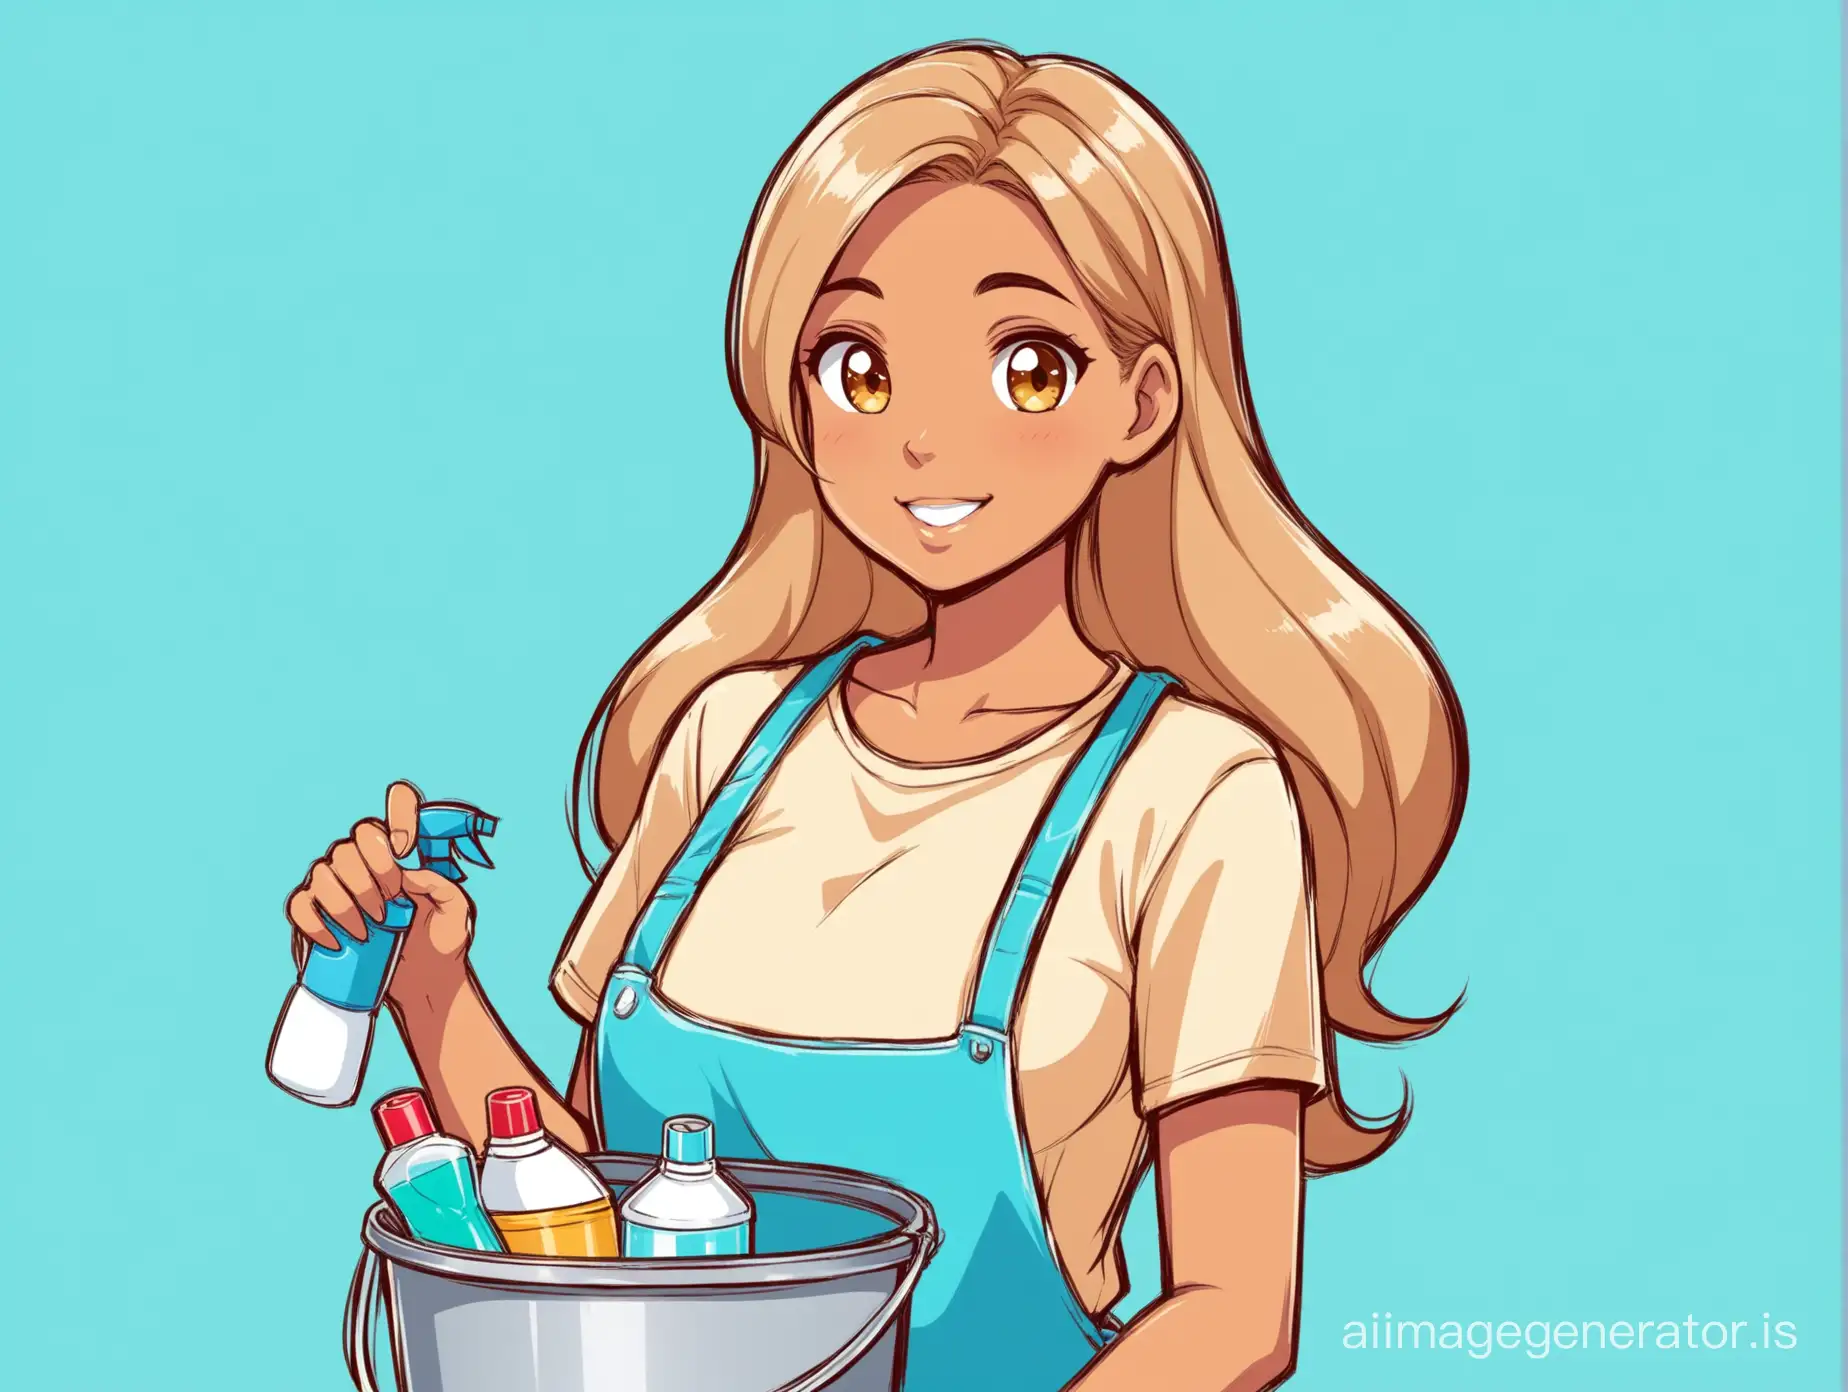 medium size Woman cleaner holding a bucket with cleaning products inside cartoon long light brown hair and light tanned skin with a light blue background